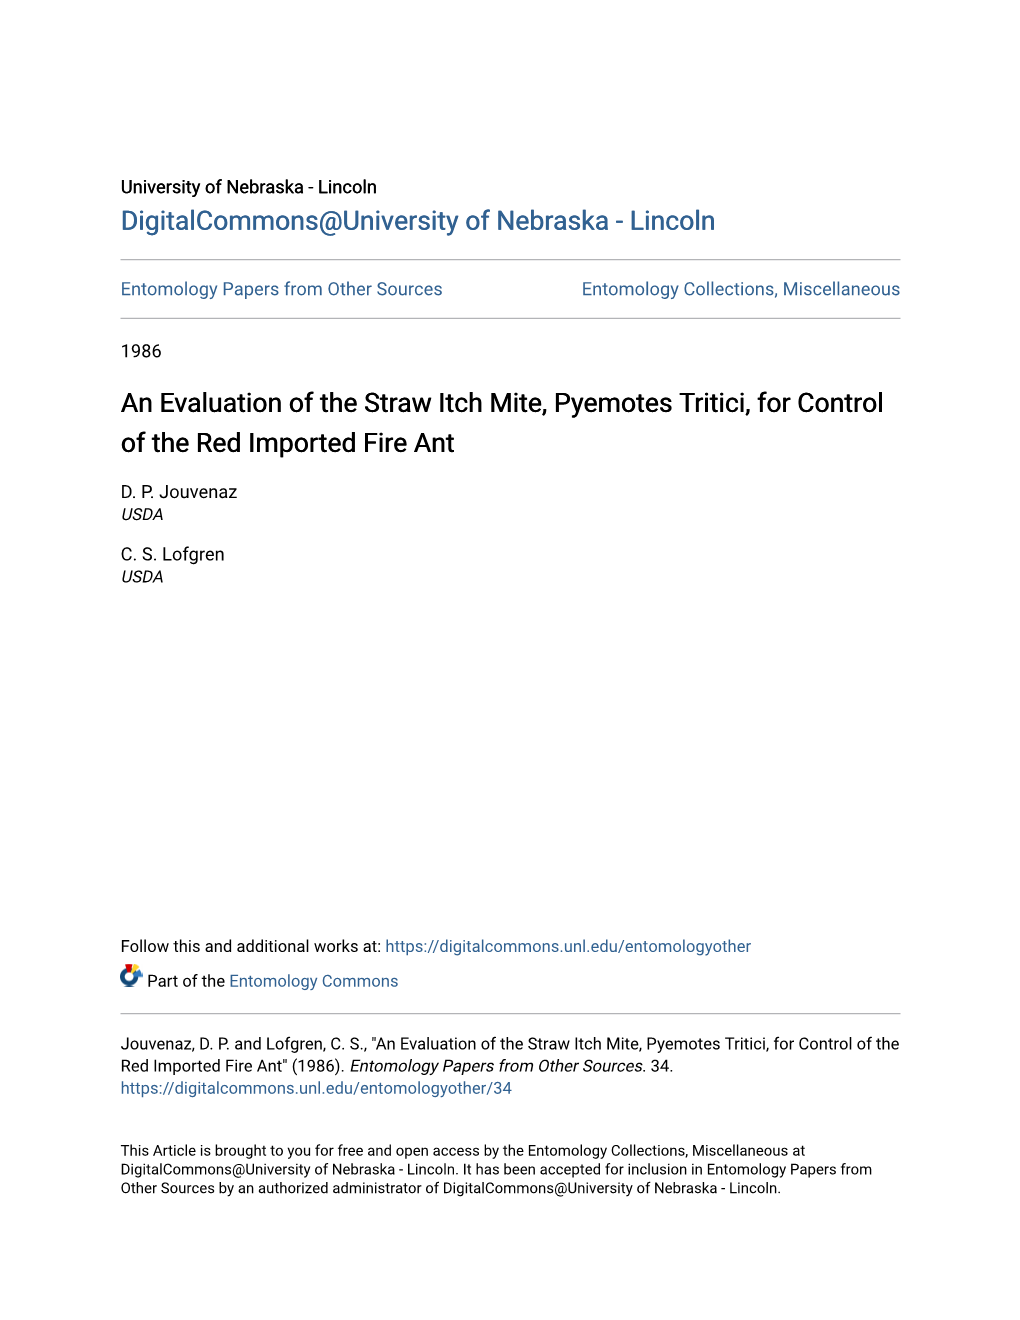 An Evaluation of the Straw Itch Mite, Pyemotes Tritici, for Control of the Red Imported Fire Ant